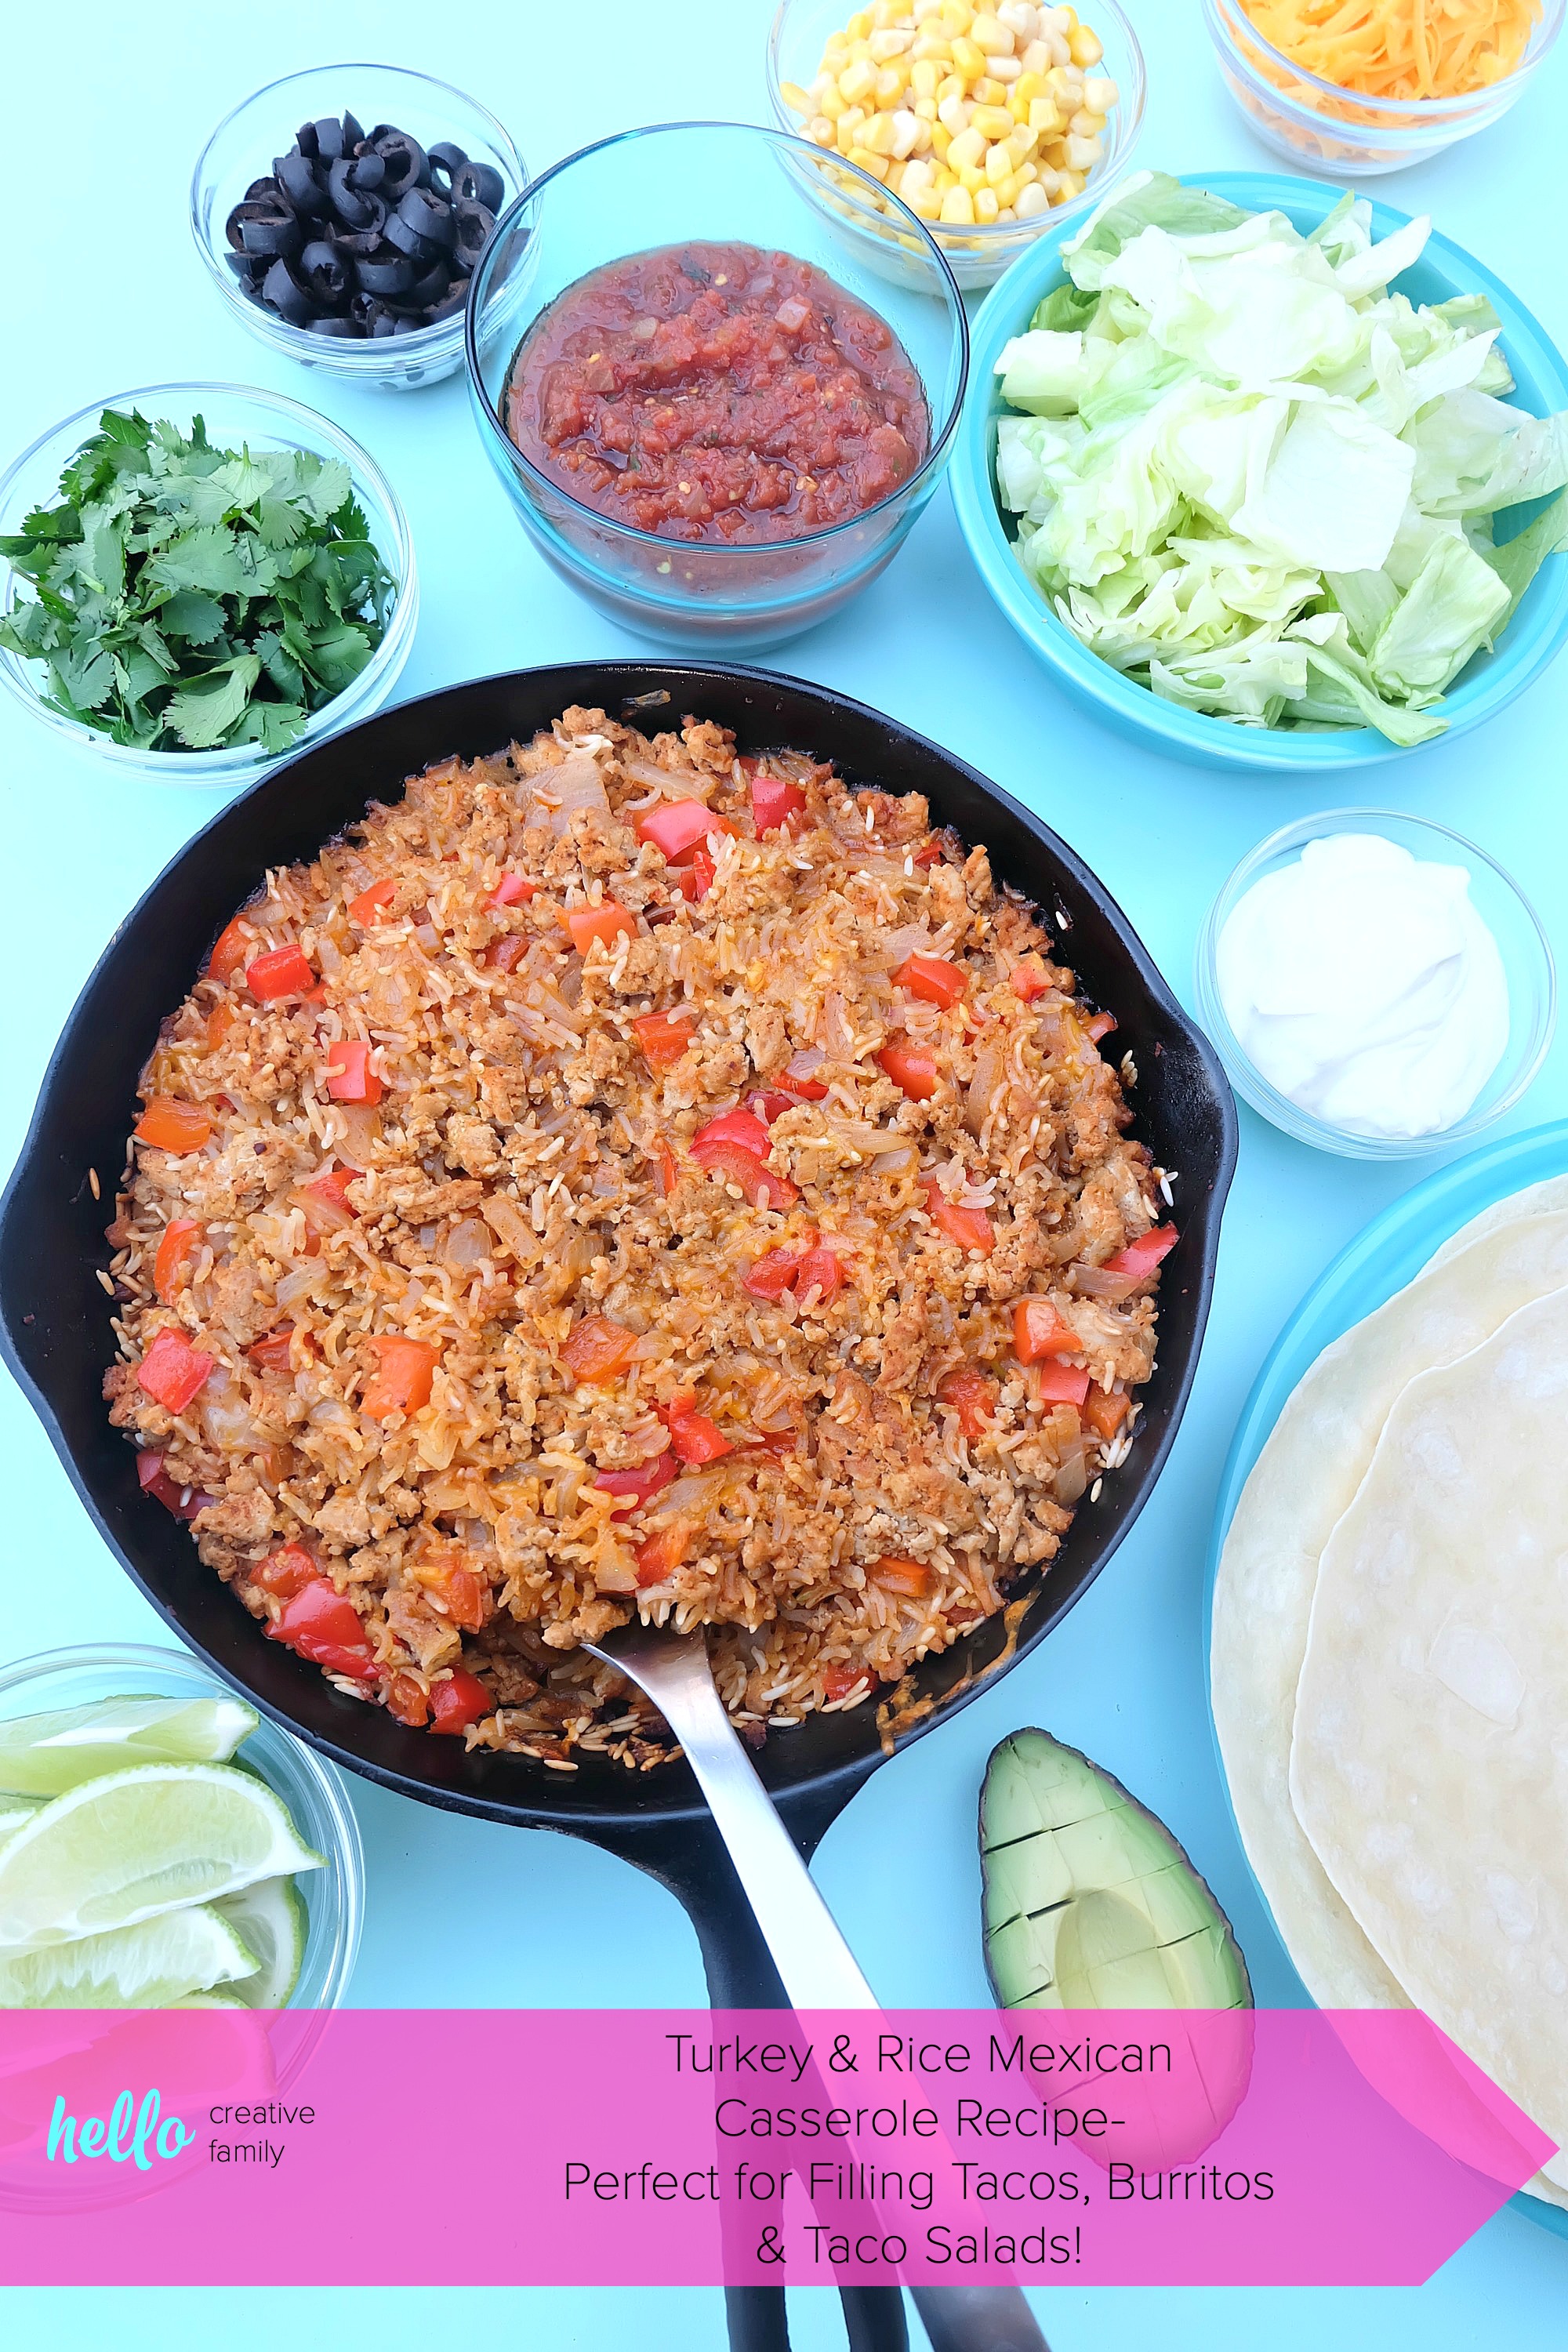 Looking for a quick and easy, one pan healthy dinner idea that will feed a crowd? This ground turkey and rice Mexican casserole recipe only takes 10 minutes to prep, then you pop it in the oven. Perfect for filling tacos, burritos or using as a topping for taco salad! A healthy, delicious and family friendly meal idea! #Sponsored #MakeItWithTurkey #Recipe #MexicanFood #Turkey #OnePan